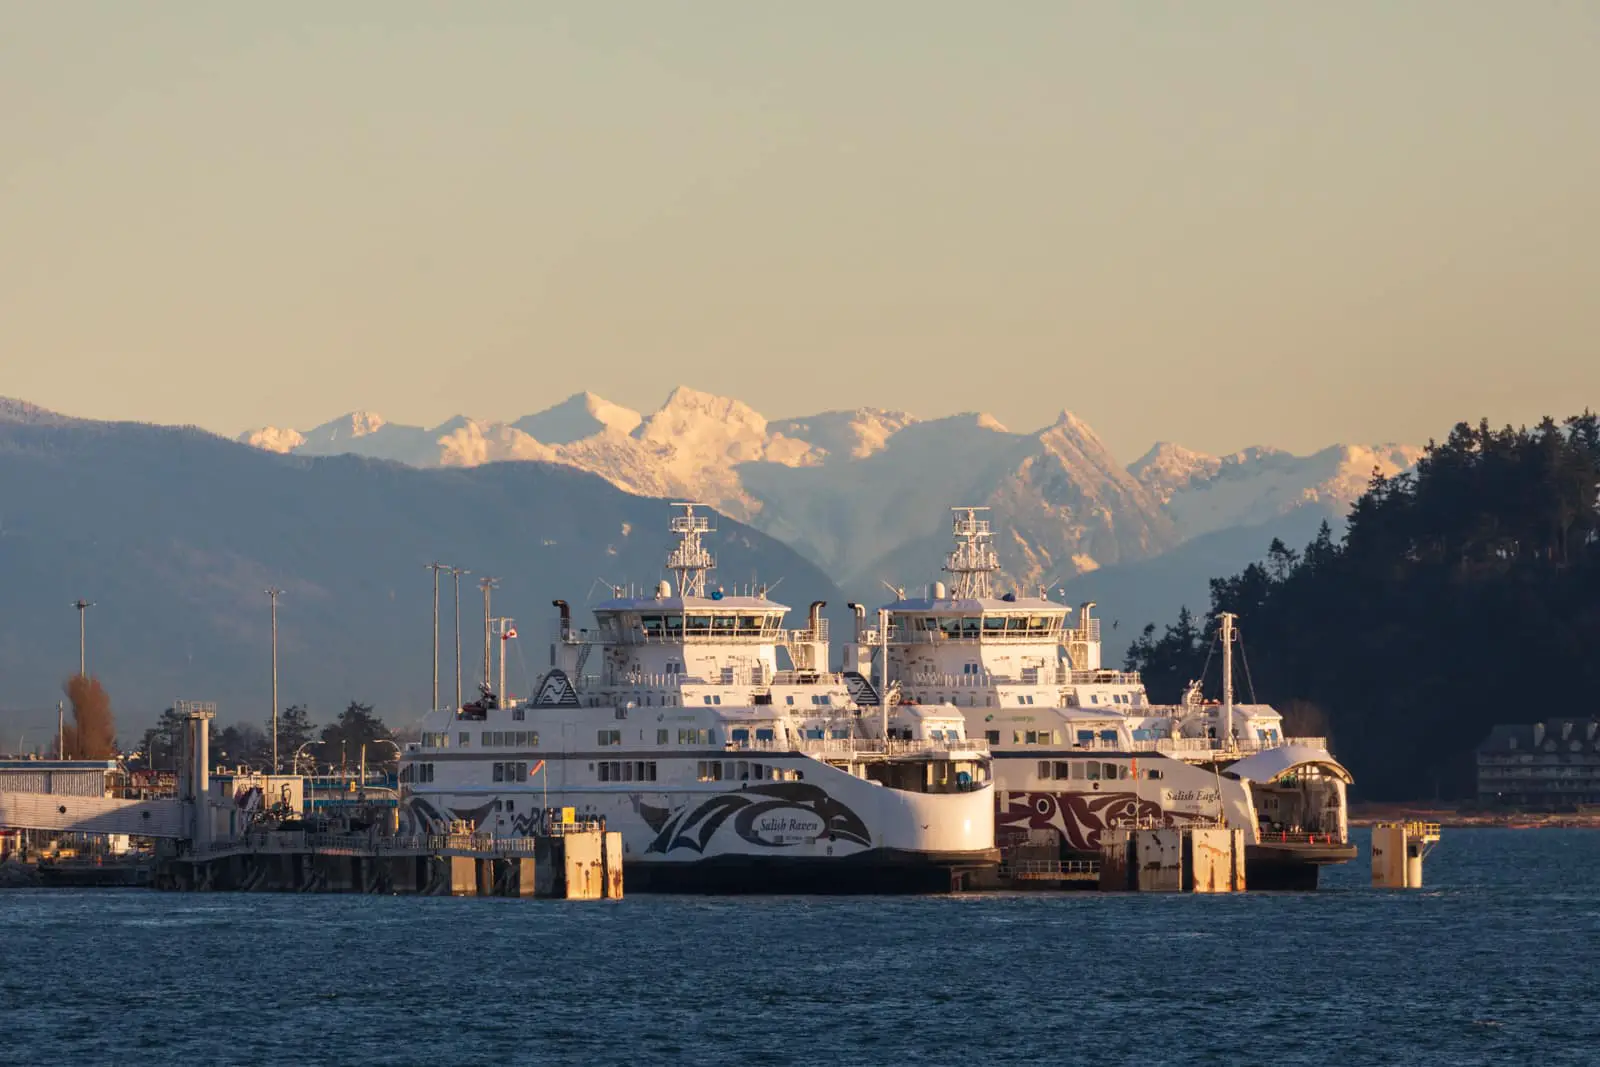 The Salish Eagle and Salish Raven docked at the Tsawwassen Ferry Terminal in Delta, Vancouver, with the mountains in the background